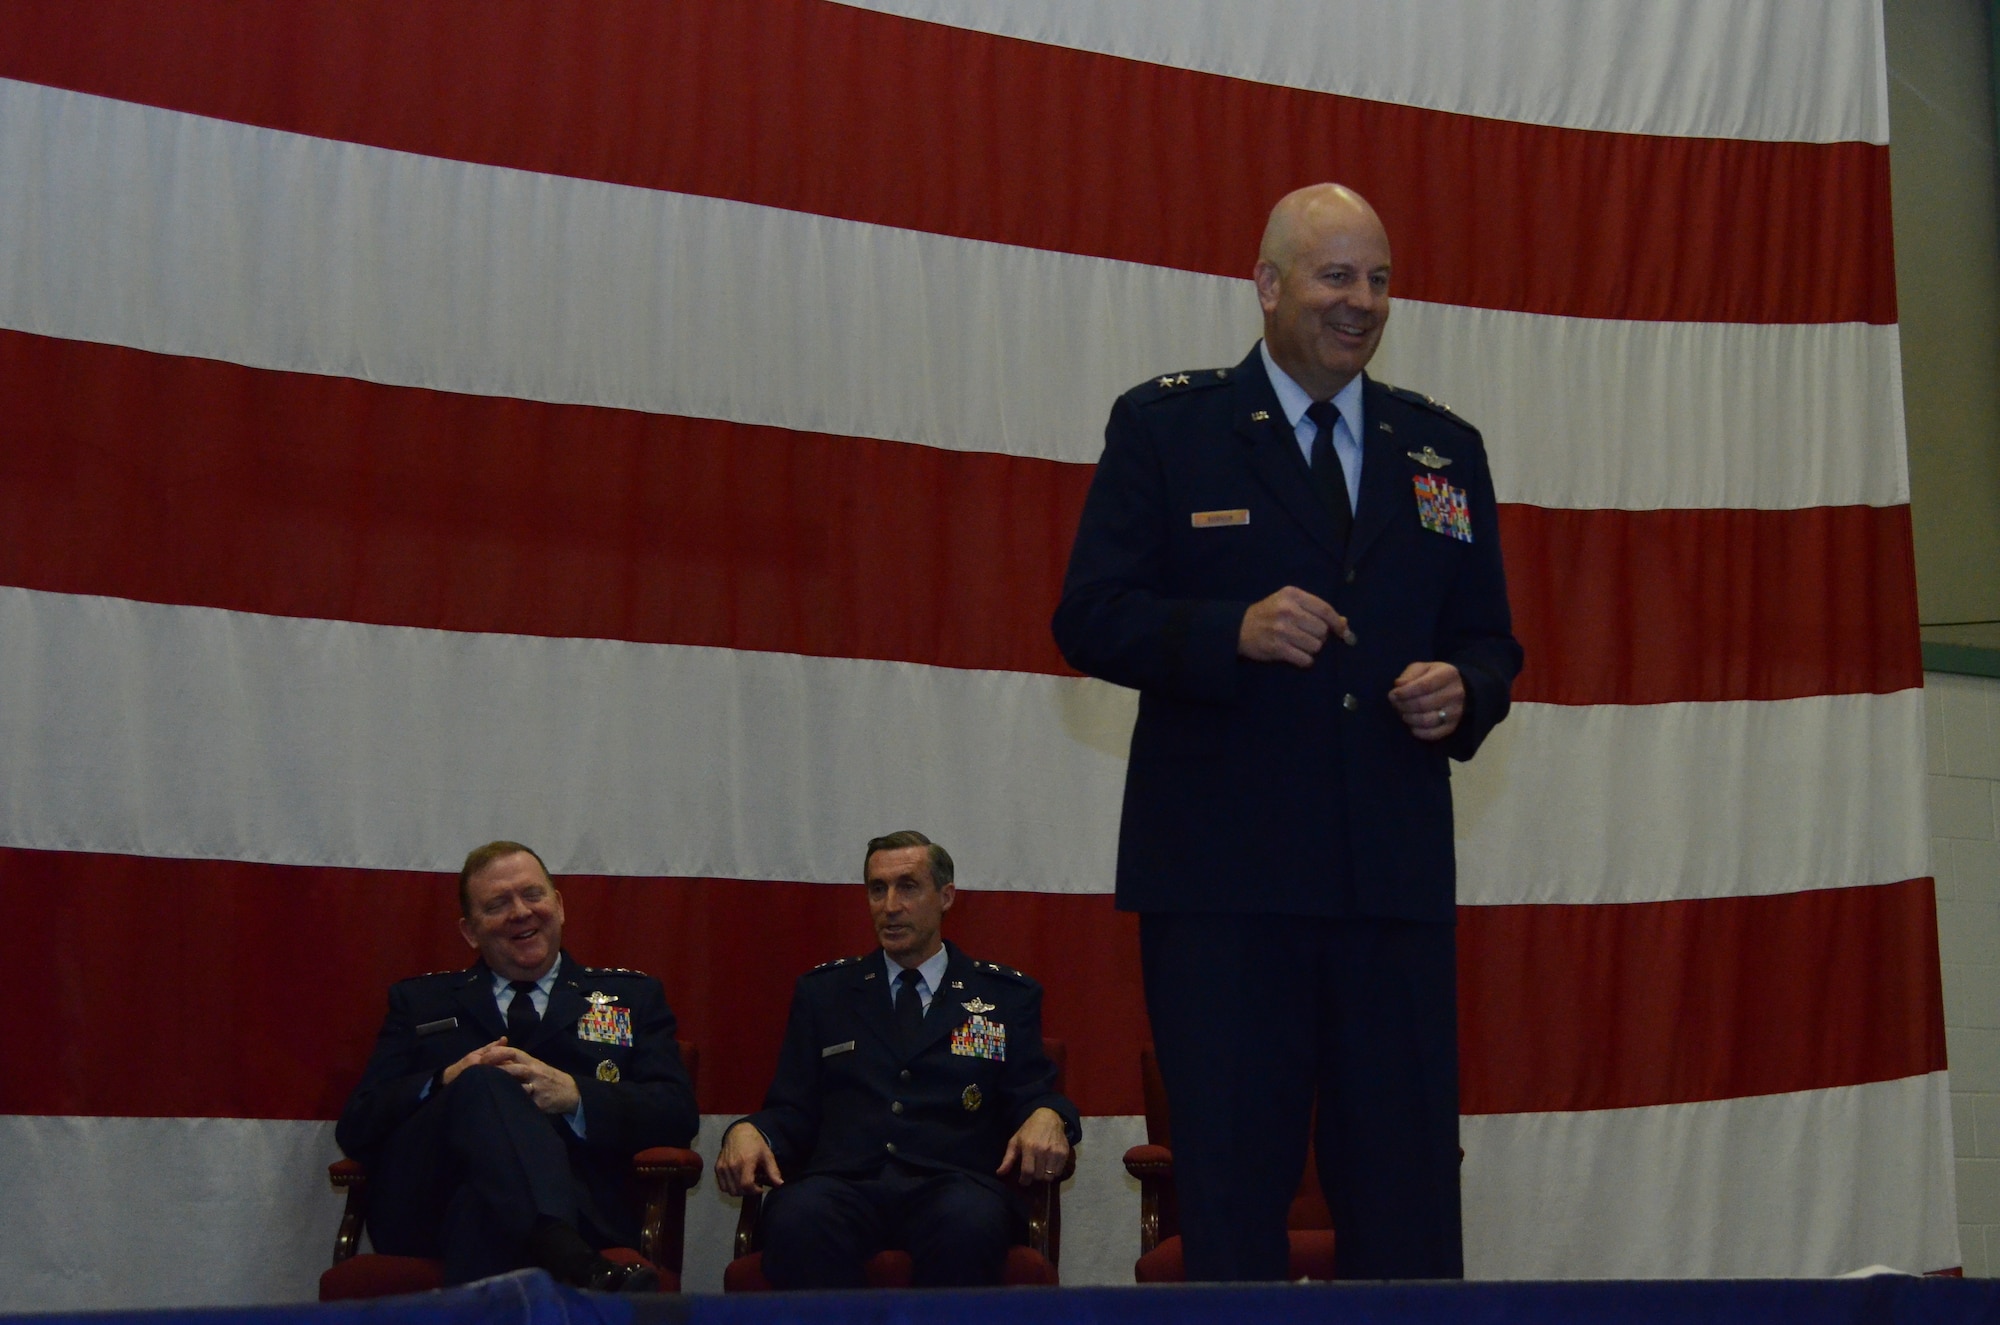 For the first time as Commander, Tenth Air Force, Maj. Gen. Brian Borgen address the men and women of Tenth Air Force during the Change of Command ceremony May 10, at Naval Air Station Fort Worth Joint Reserve Base, Texas.